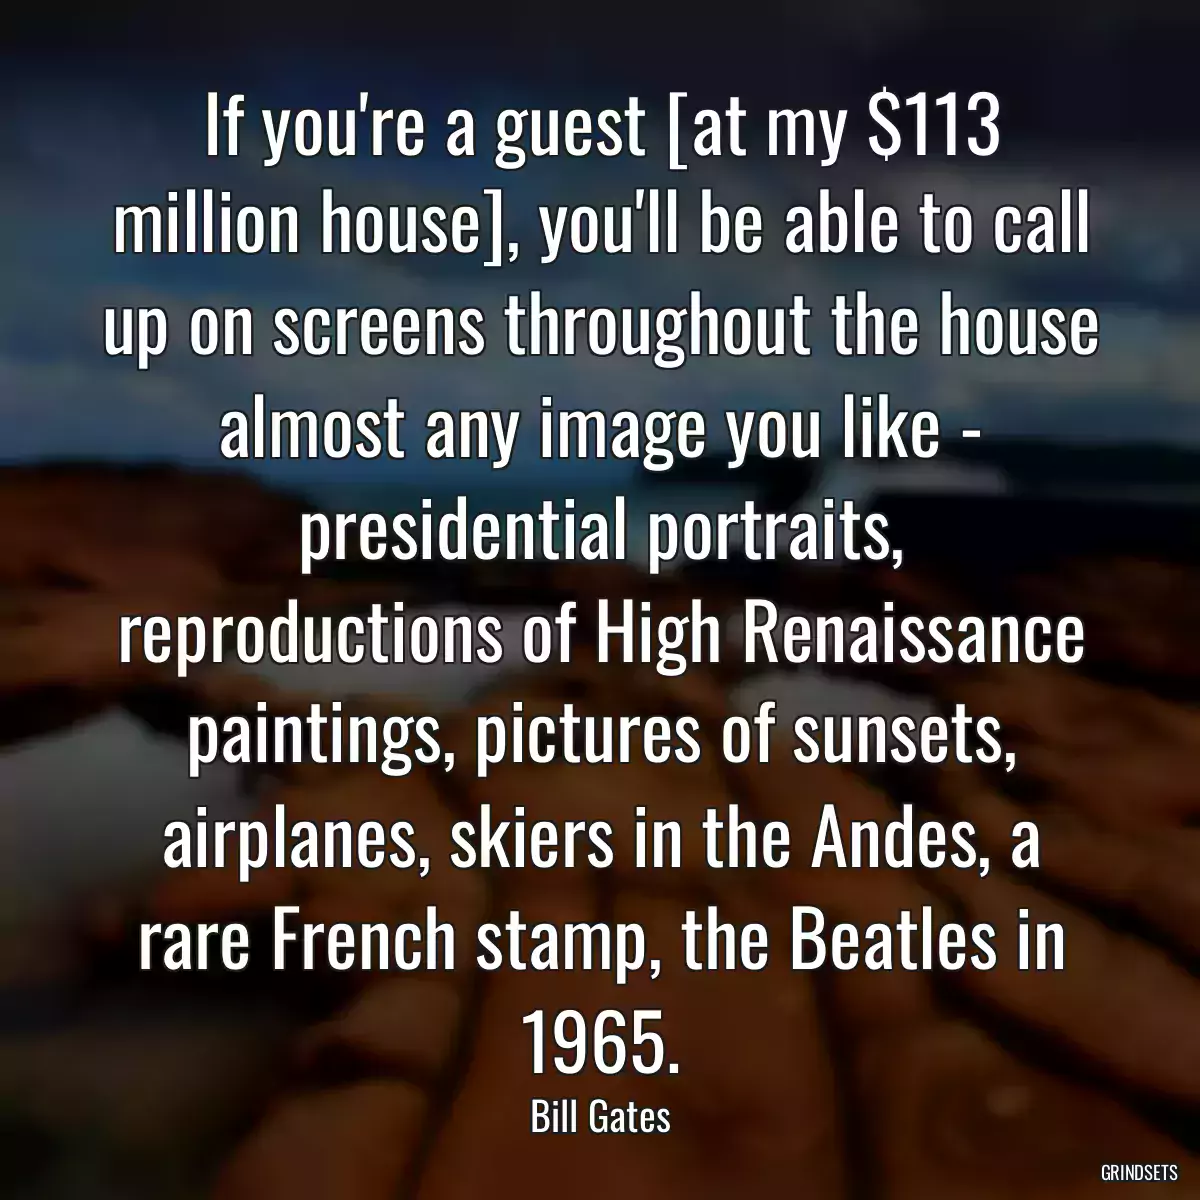 If you\'re a guest [at my $113 million house], you\'ll be able to call up on screens throughout the house almost any image you like - presidential portraits, reproductions of High Renaissance paintings, pictures of sunsets, airplanes, skiers in the Andes, a rare French stamp, the Beatles in 1965.